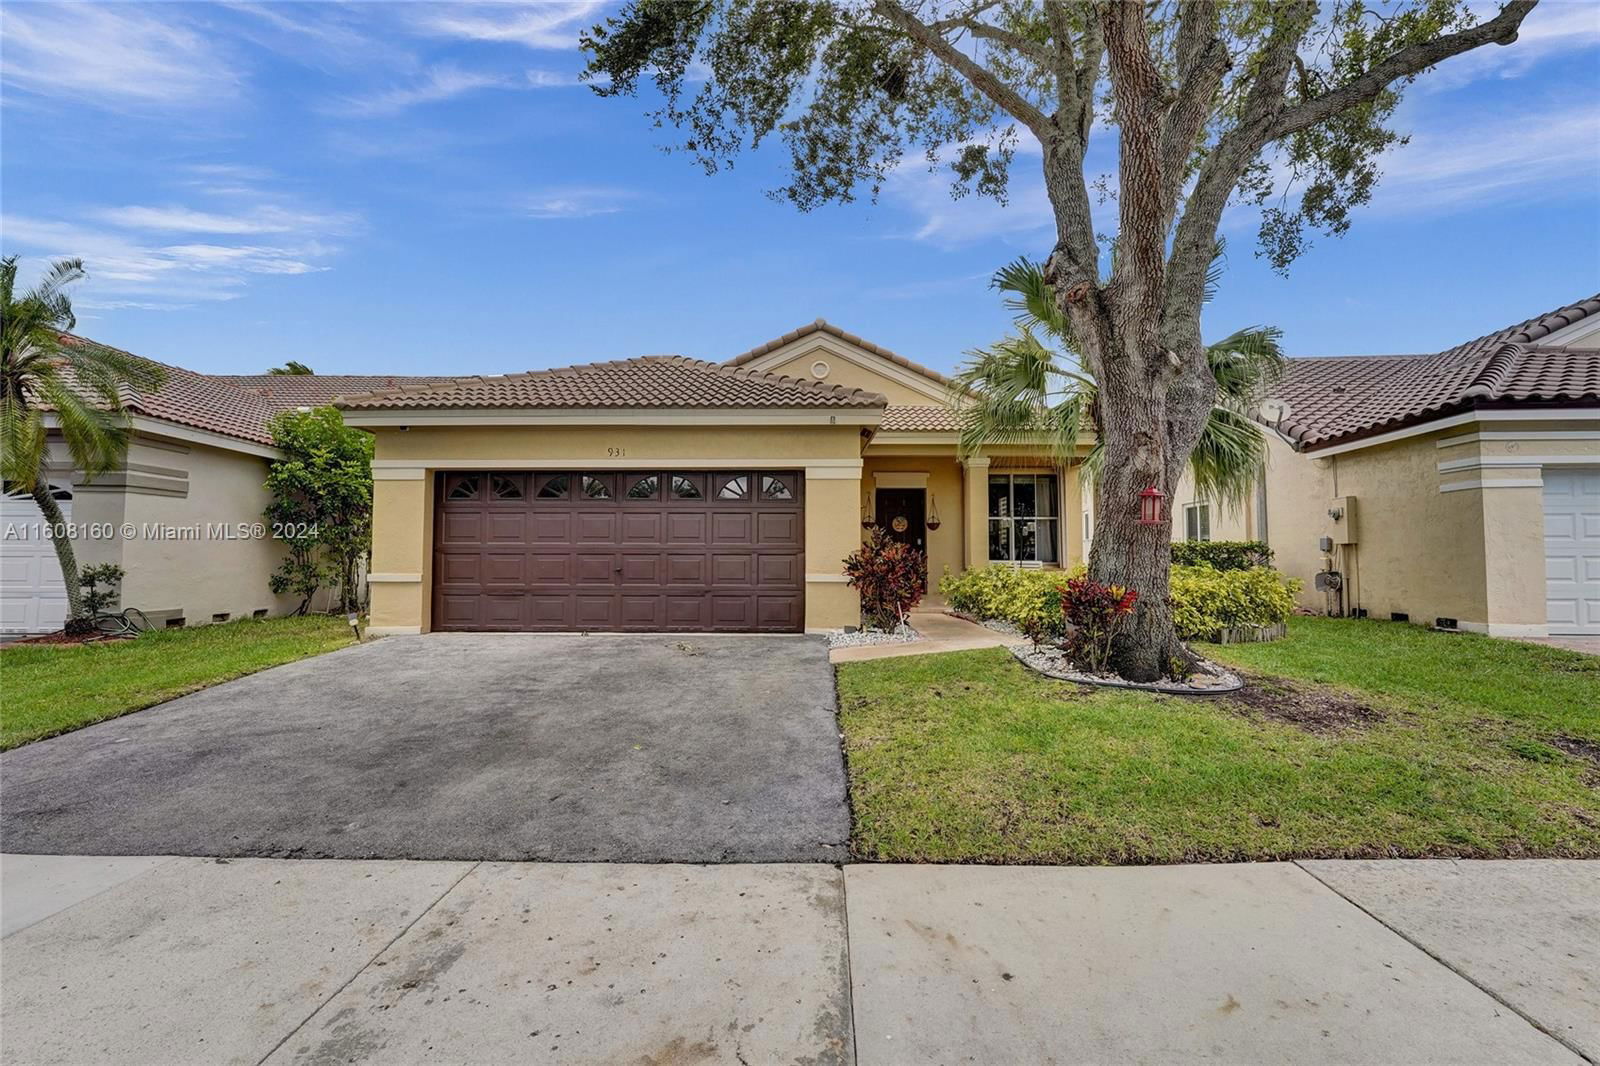 Real estate property located at 931 Falling Water Rd, Broward County, Stanton, Weston, FL